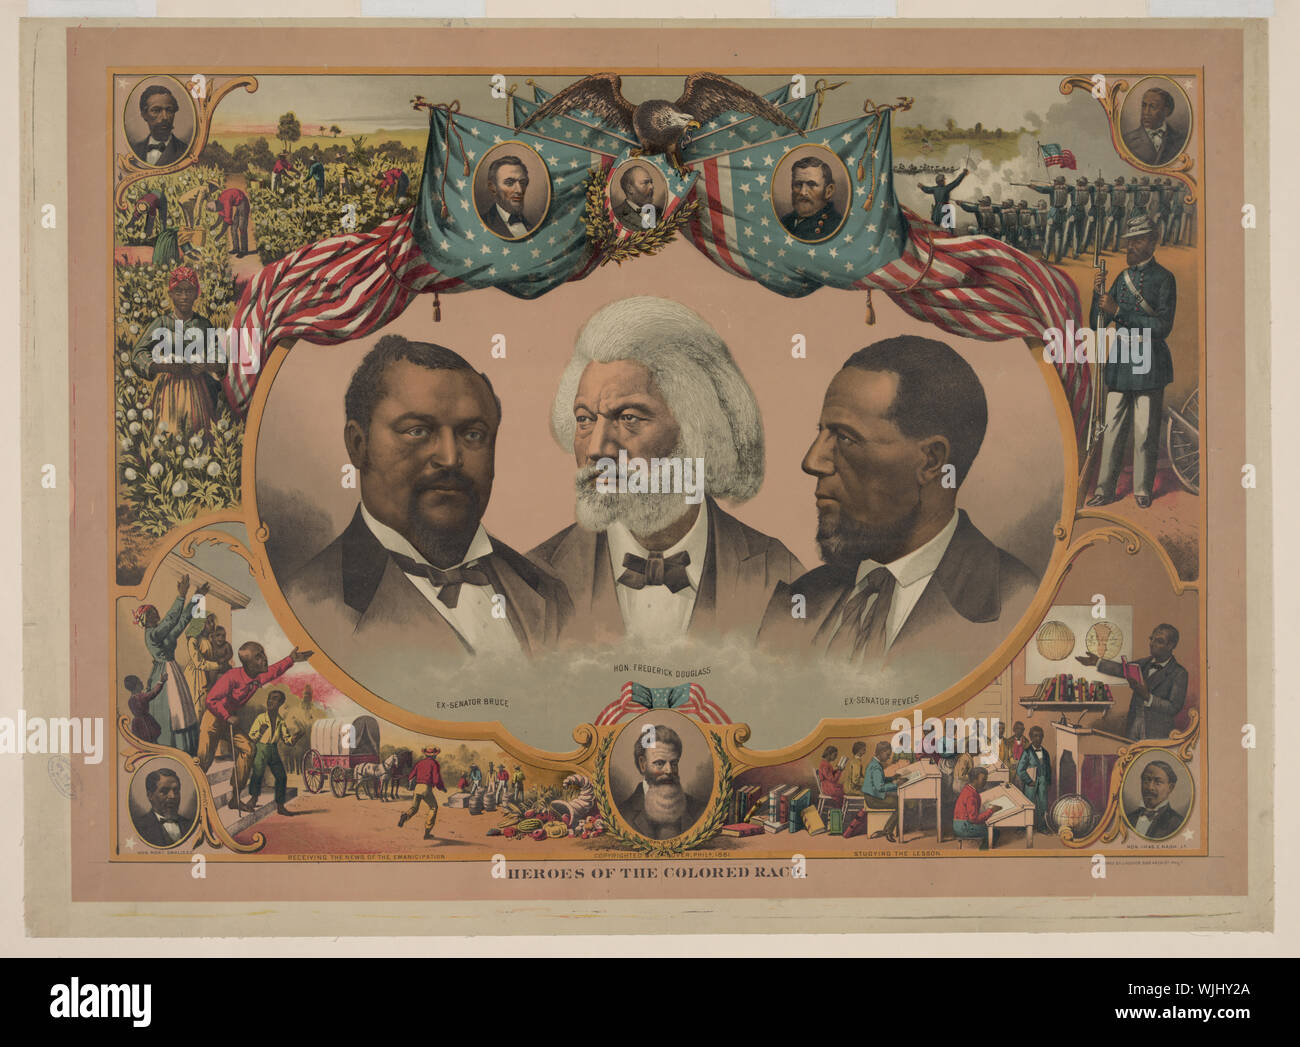 Heroes of the colored race Abstract: Print shows head-and-shoulders portraits of Blanche Kelso Bruce, Frederick Douglass, and Hiram Rhoades Revels surrounded by scenes of African American life and portraits of Jno. R. Lynch, Abraham Lincoln, James A. Garfield, Ulysses S. Grant, Joseph H. Rainey, Charles E. Nash, John Brown, and Robert Smalls. Stock Photo